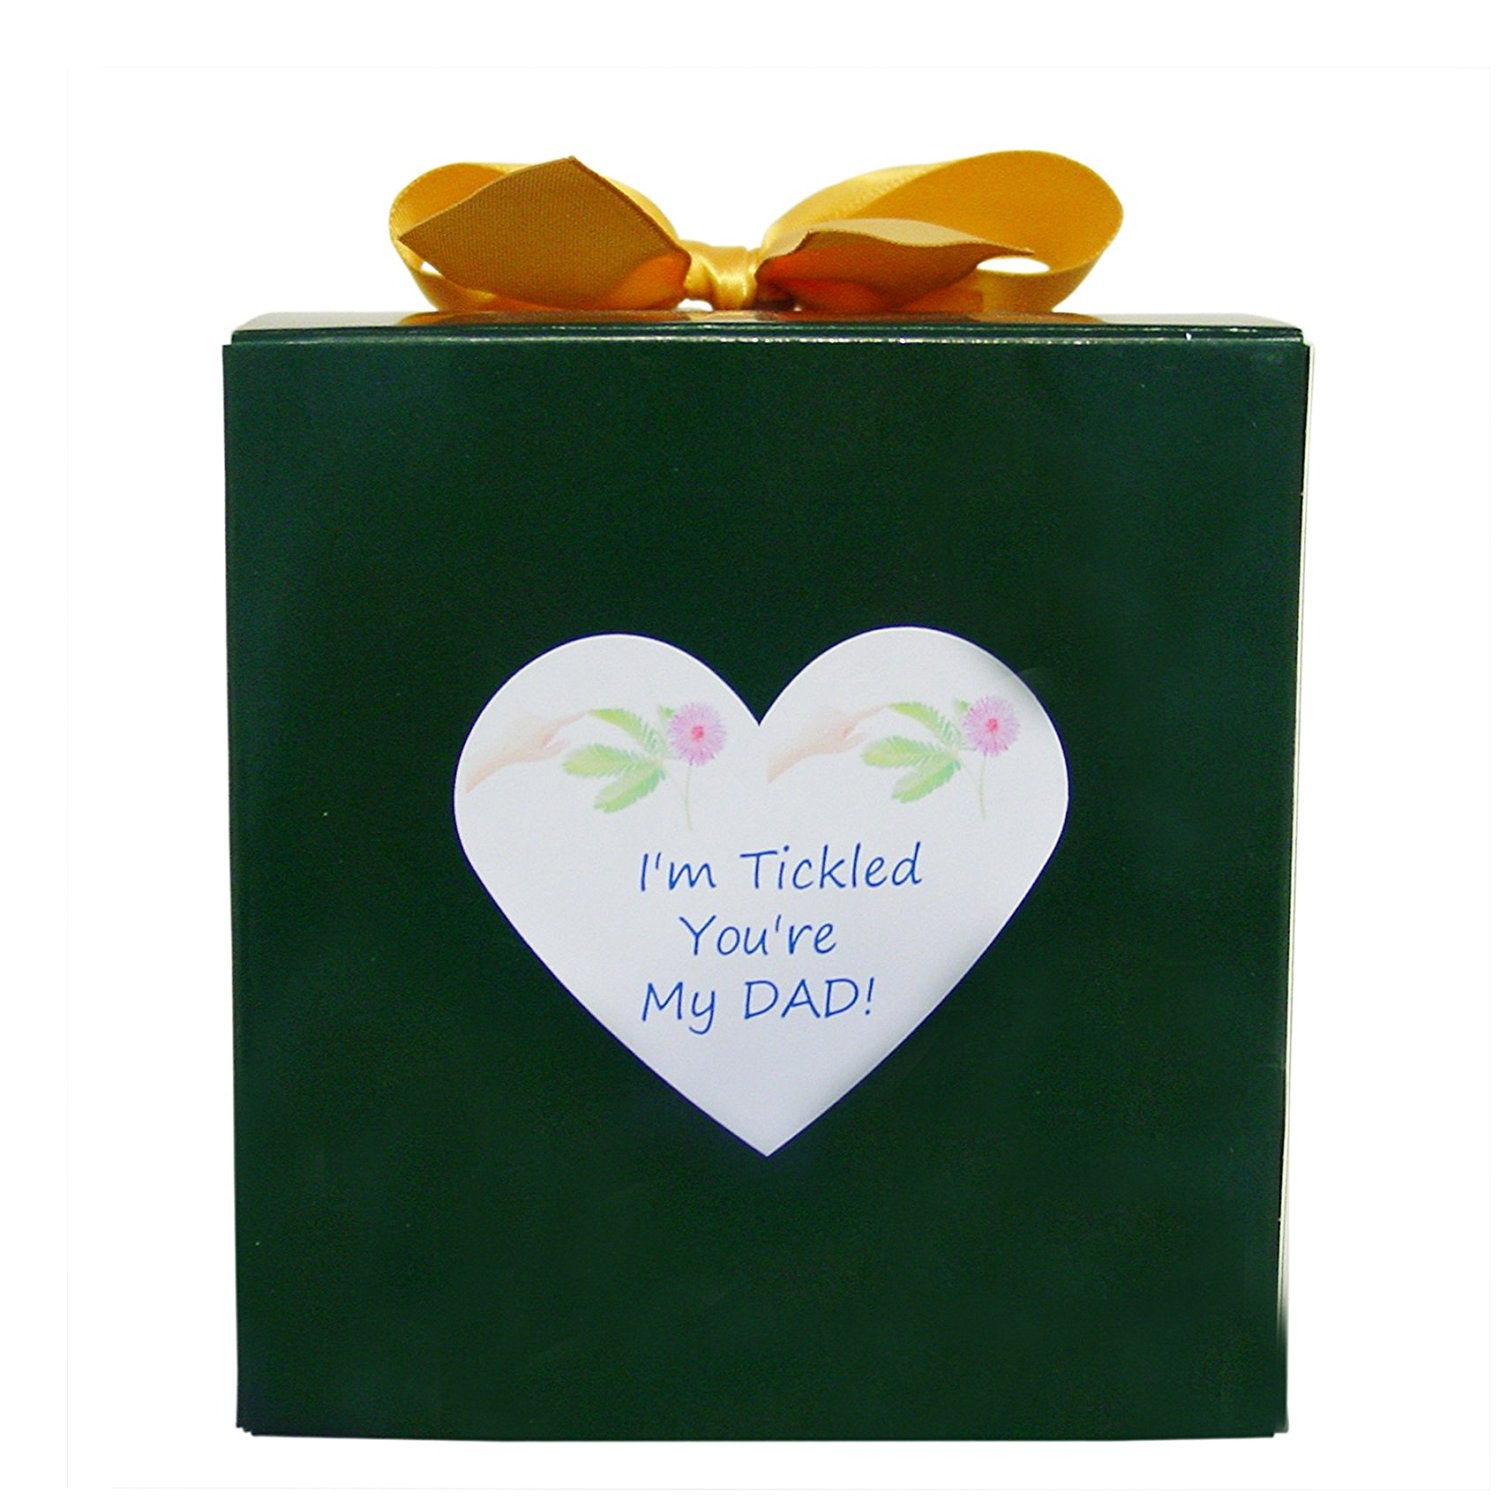 Birthday Gift or Father's Day Gift For Dad -TickleMe Plant Box Set - TickleMe Plant Company, Inc